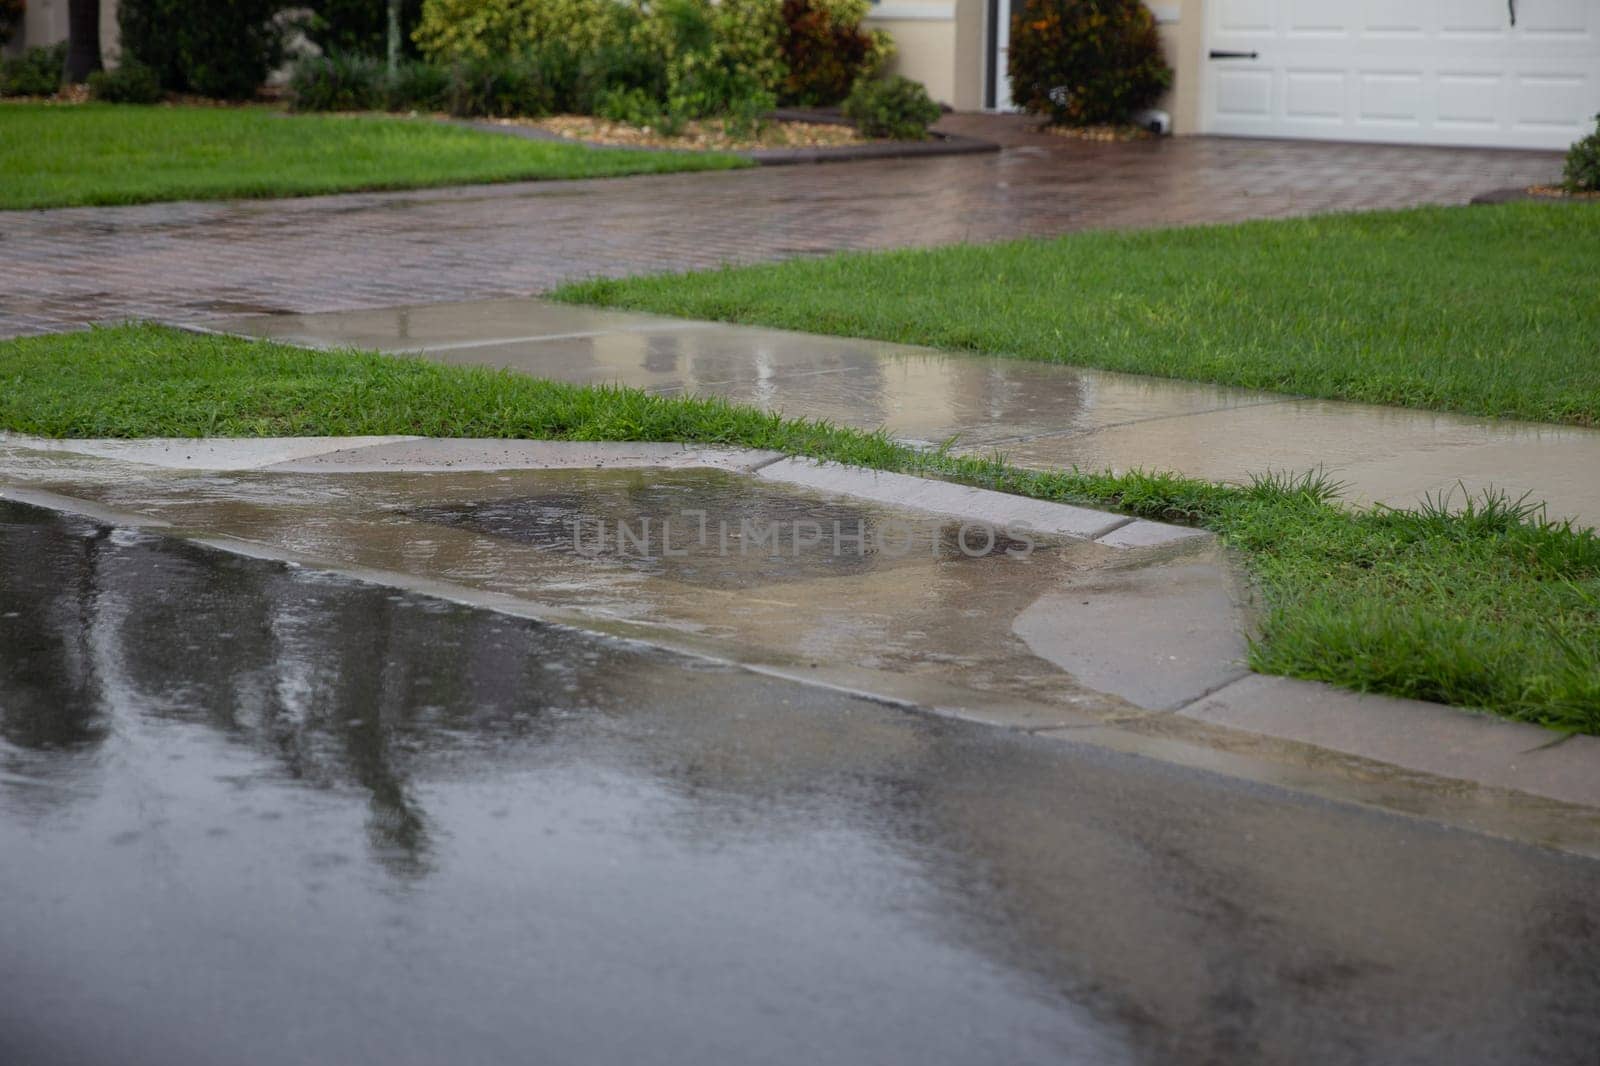 Hurricane Flooding in residential neighborhood with the storm drain clogged